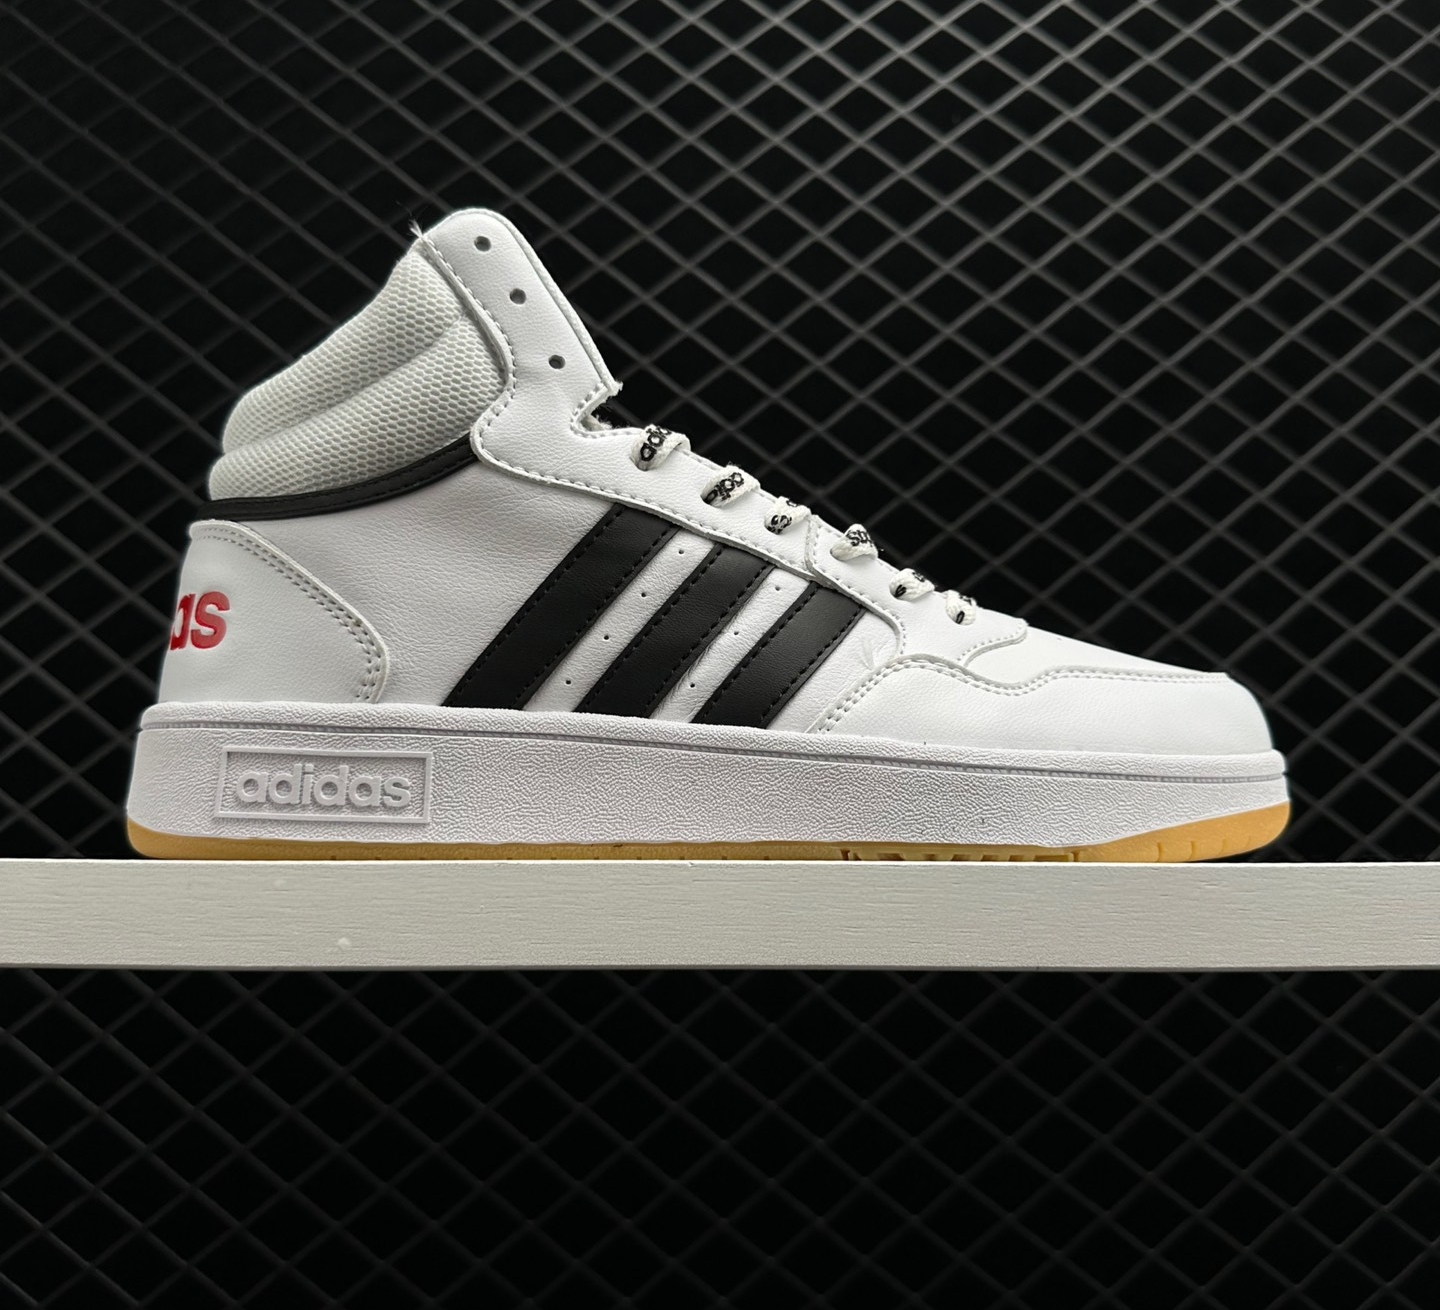 Adidas Hoops 3.0 Mid Sneakers - White Navy Gum | Classic Style & Superior Comfort.